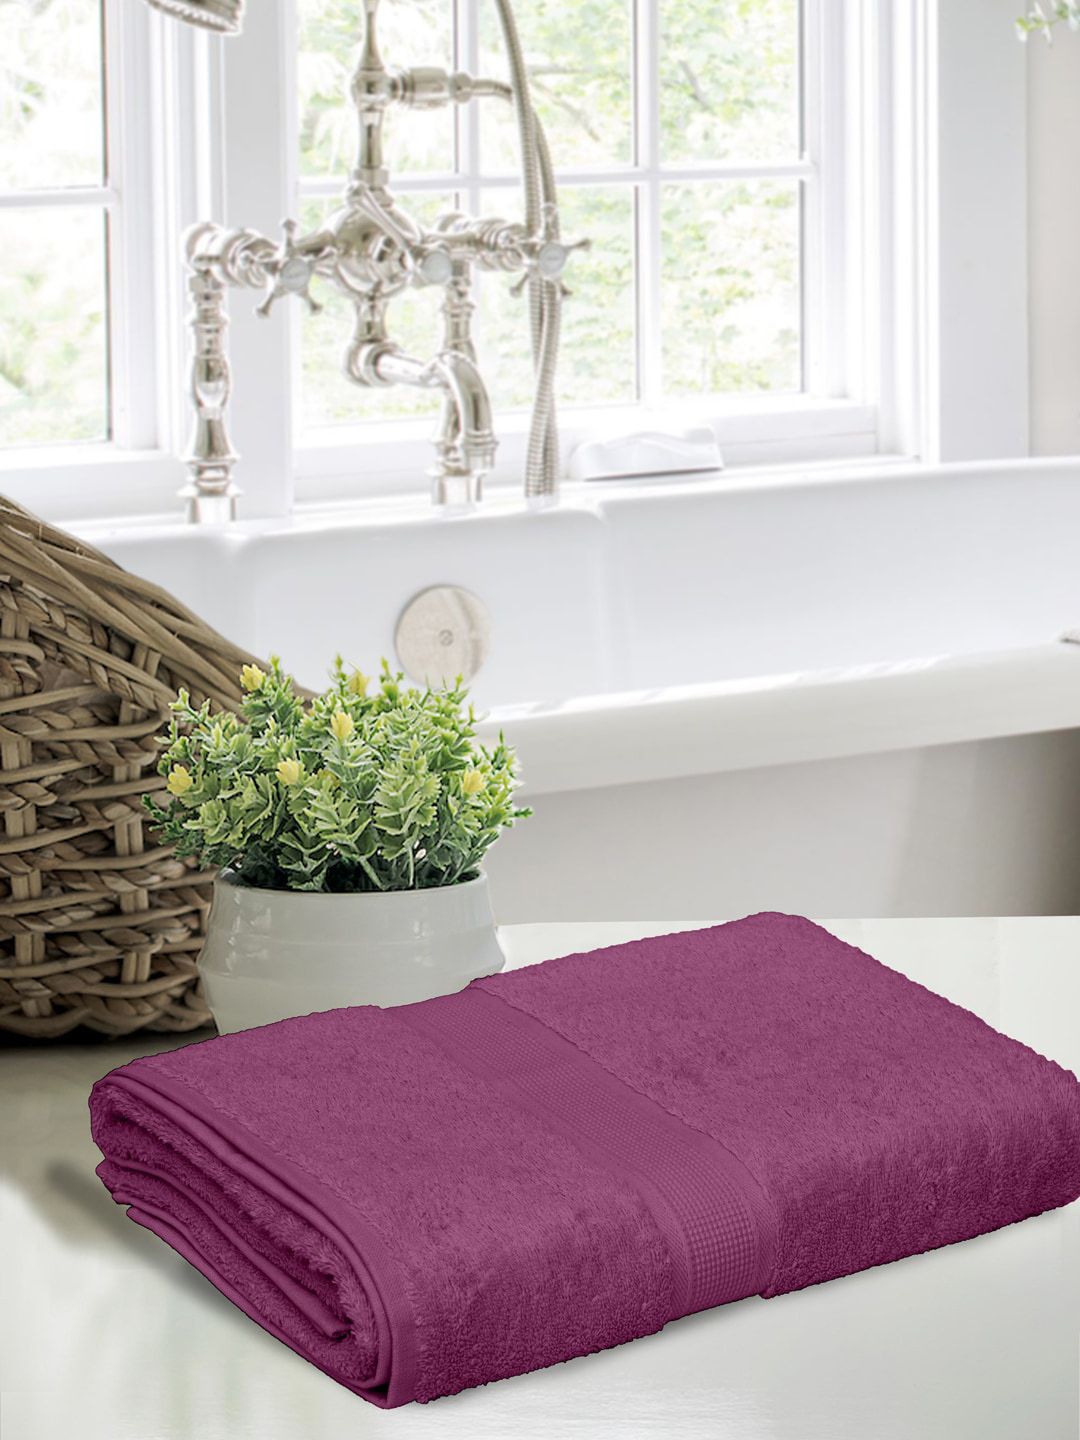 BOMBAY DYEING Maroon Solid 550 GSM Pure Cotton Bath Towel Price in India